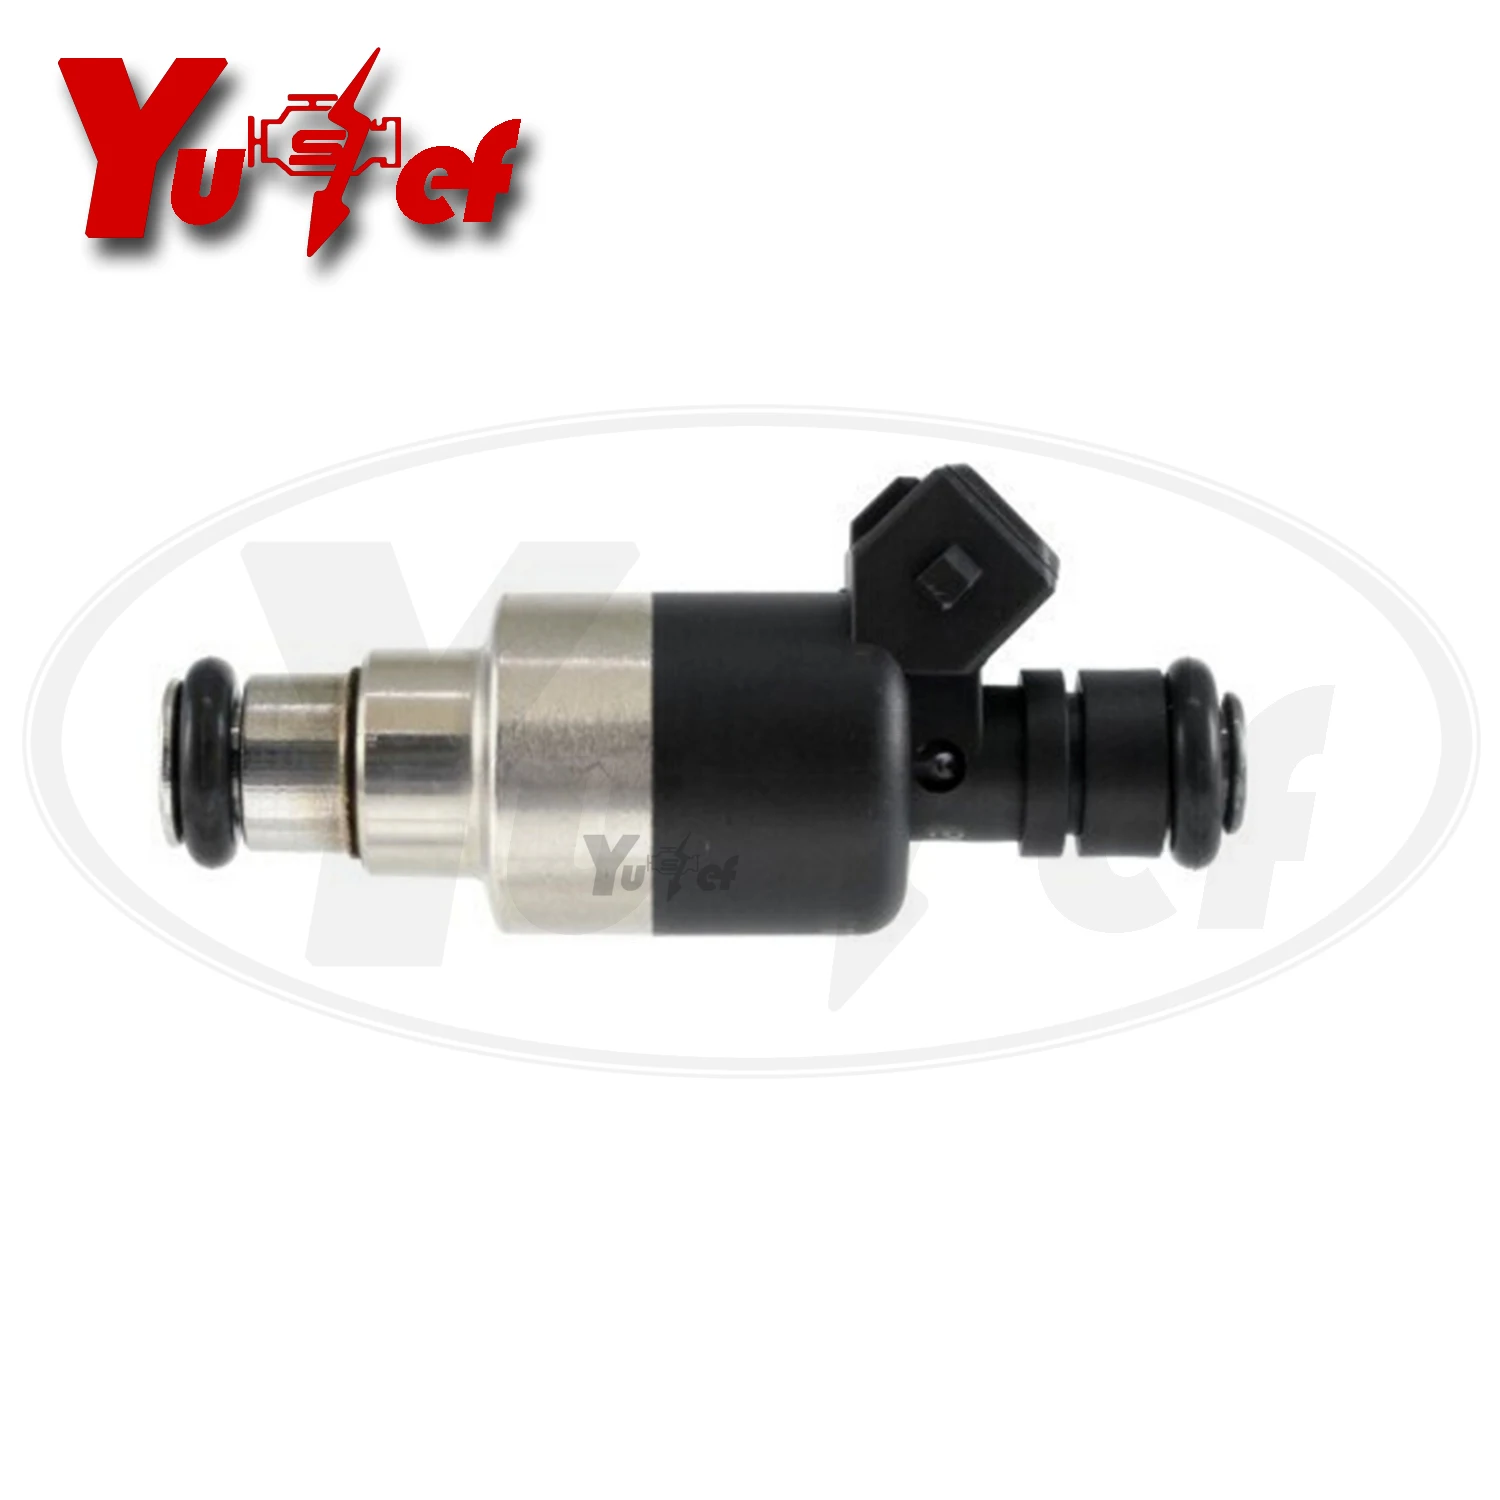 

high quality fuel injector nozzle fit for BONNEVILLE FIREBIRD 6CYL 3.8L 17103146 17069648 17083476 17105050